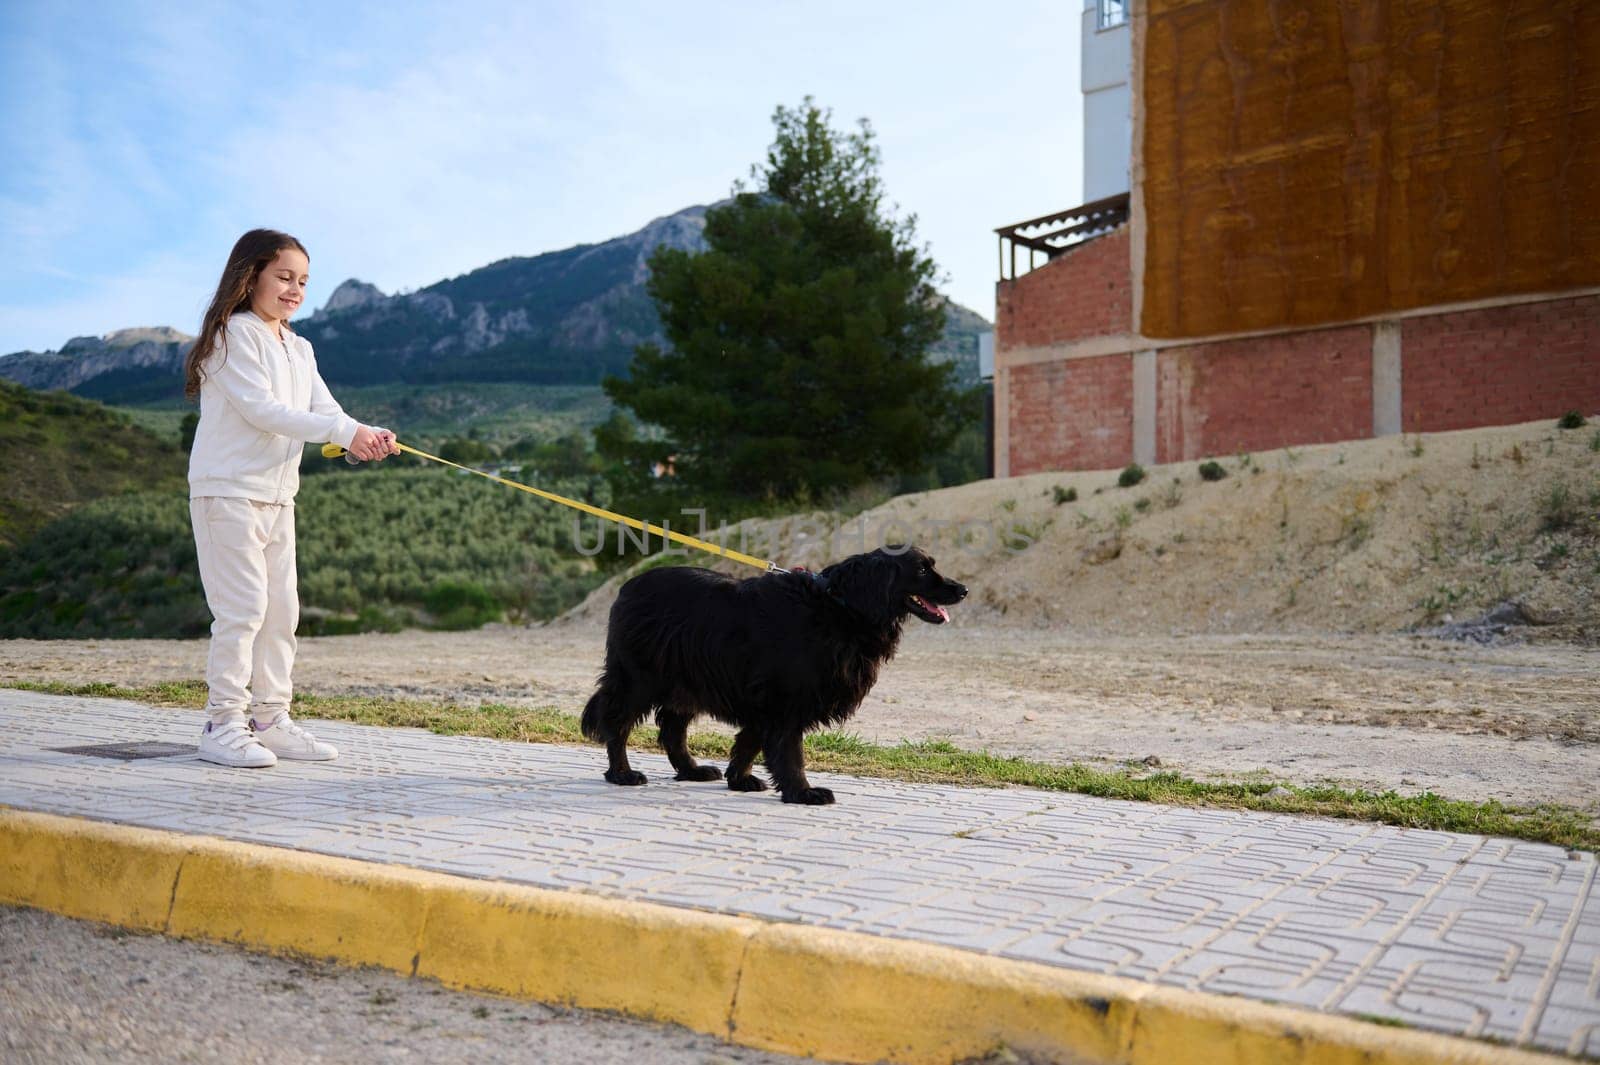 Adorable child kid enjoying her morning walk with her pedigree dog, a black purebred cocker spaniel in the mountains nature outdoors. People. Nature and playing pets concept by artgf